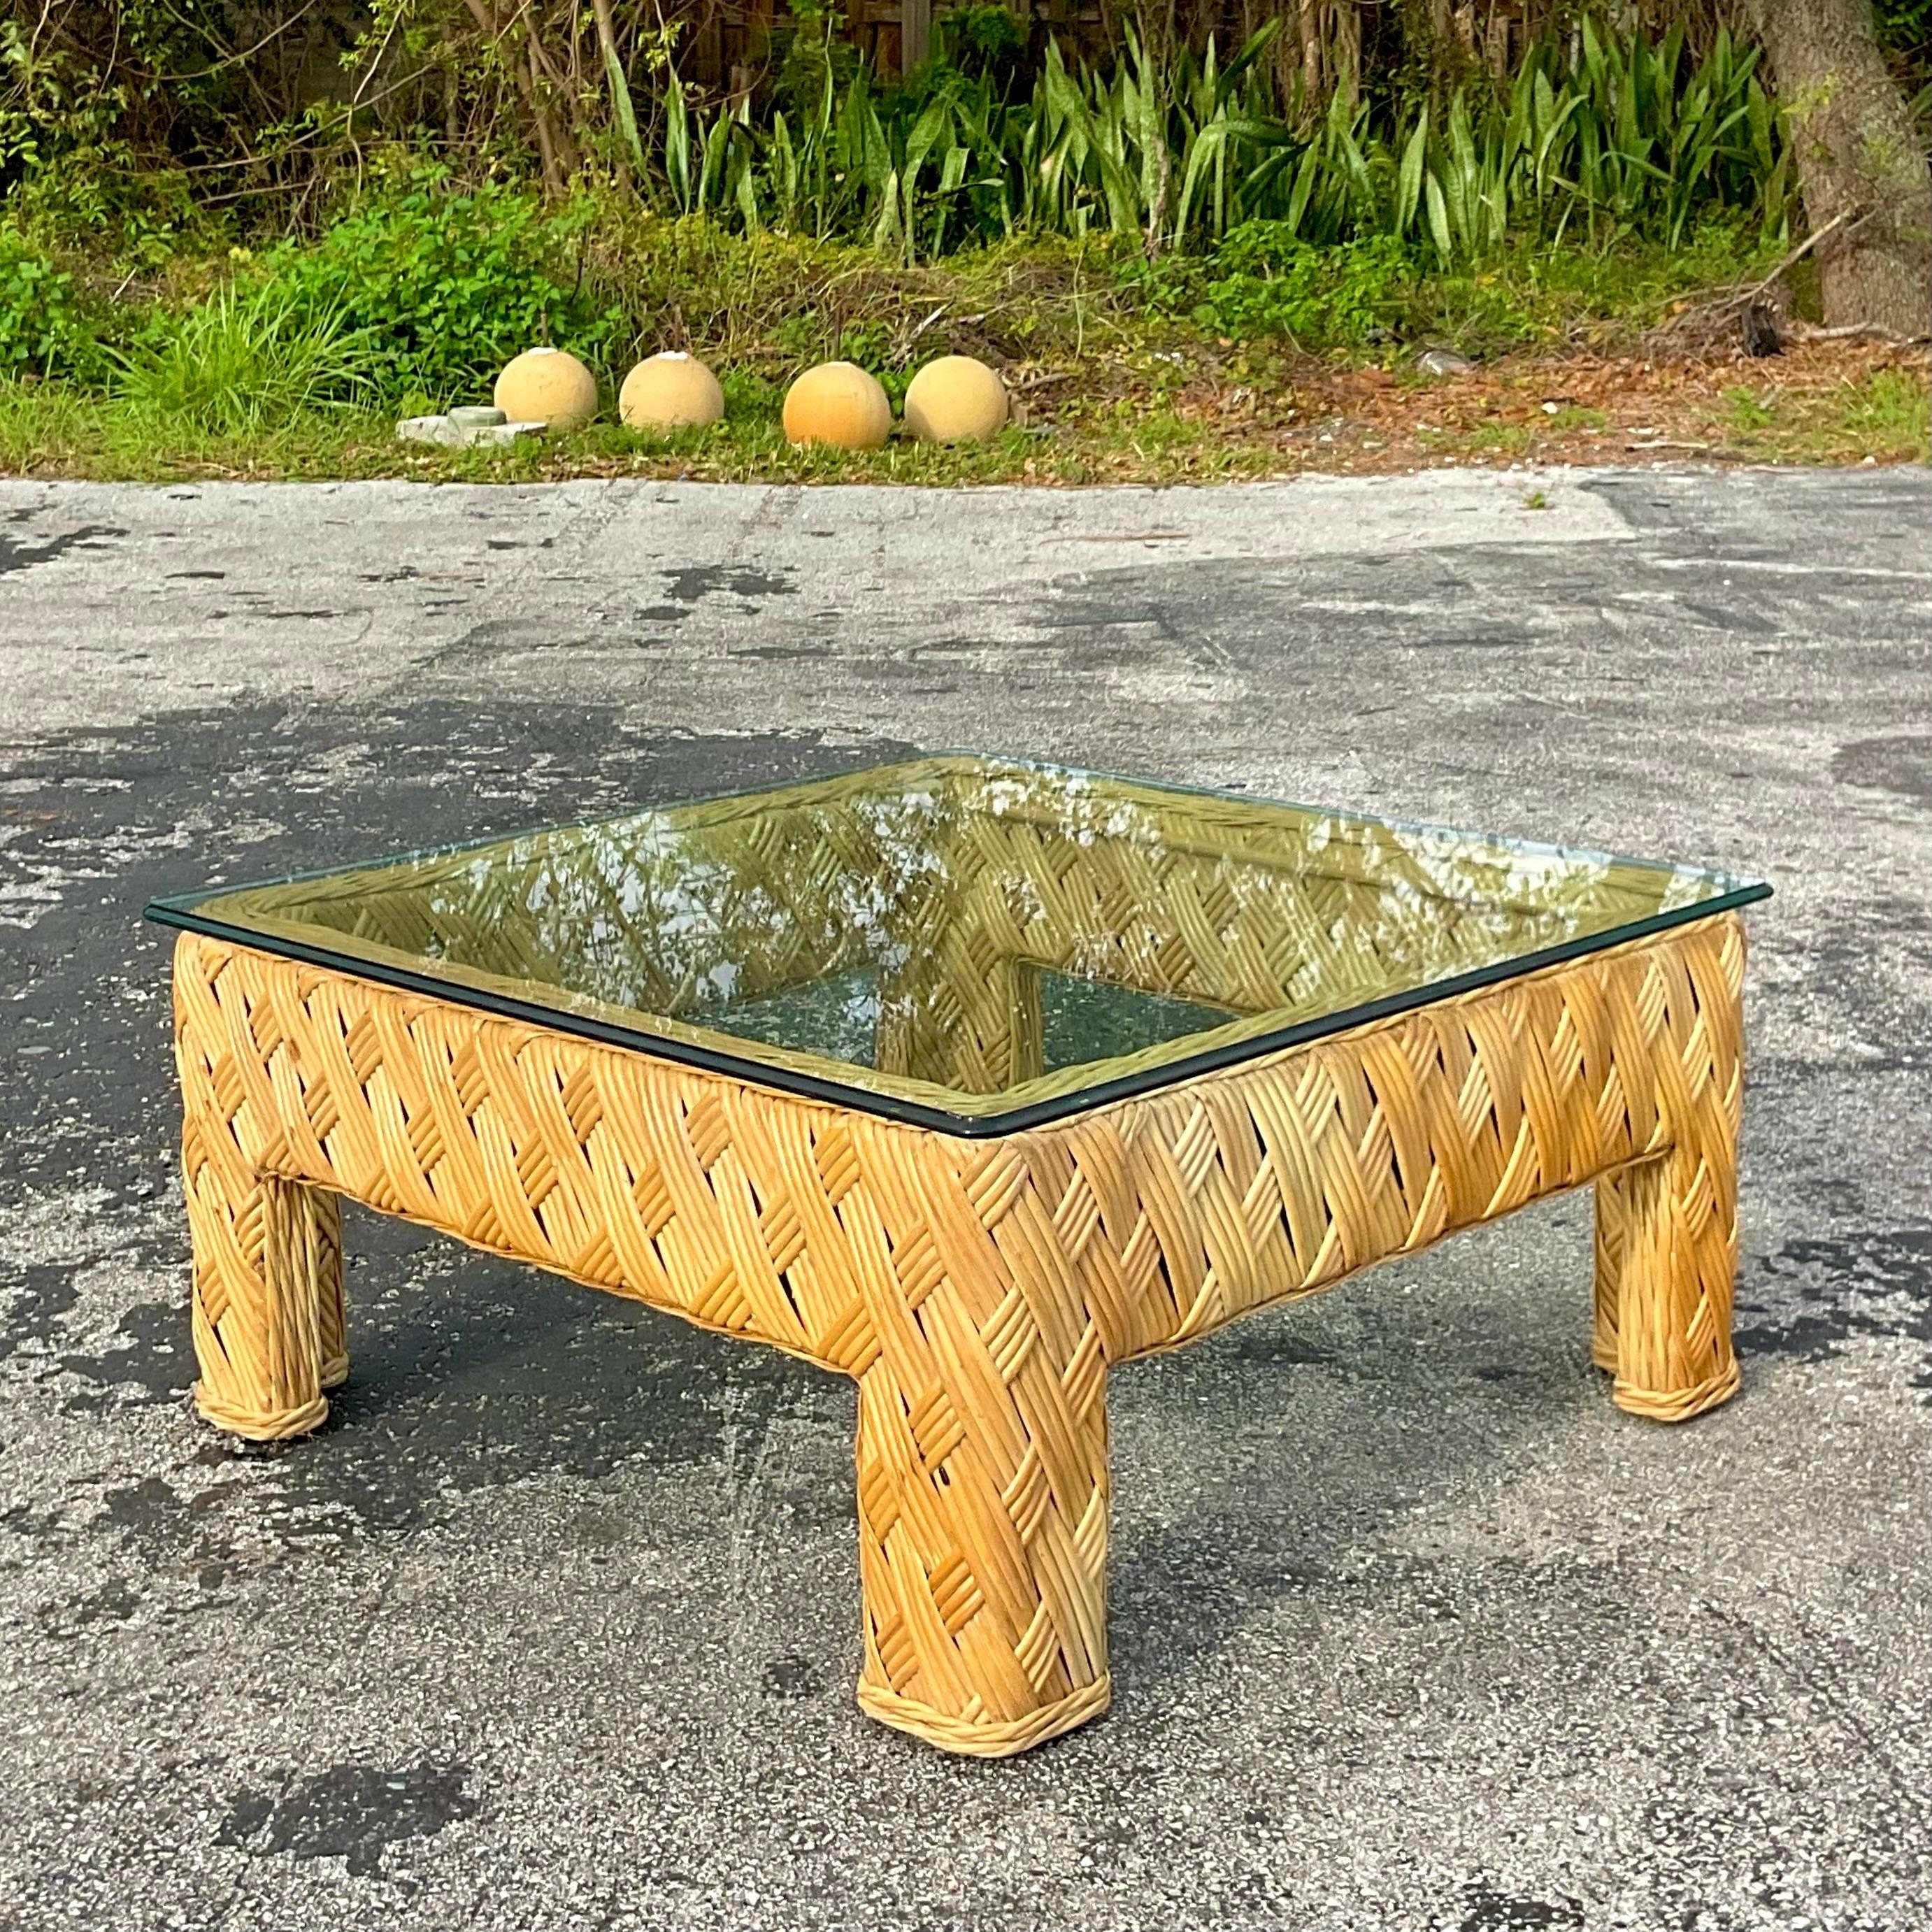 A stunning vintage Coastal coffee table. A chic crosshatch woven rattan in a classic Parsons shape. Glass top makes it easy to see the beautiful interior weave. Acquired from a Palm Beach estate.